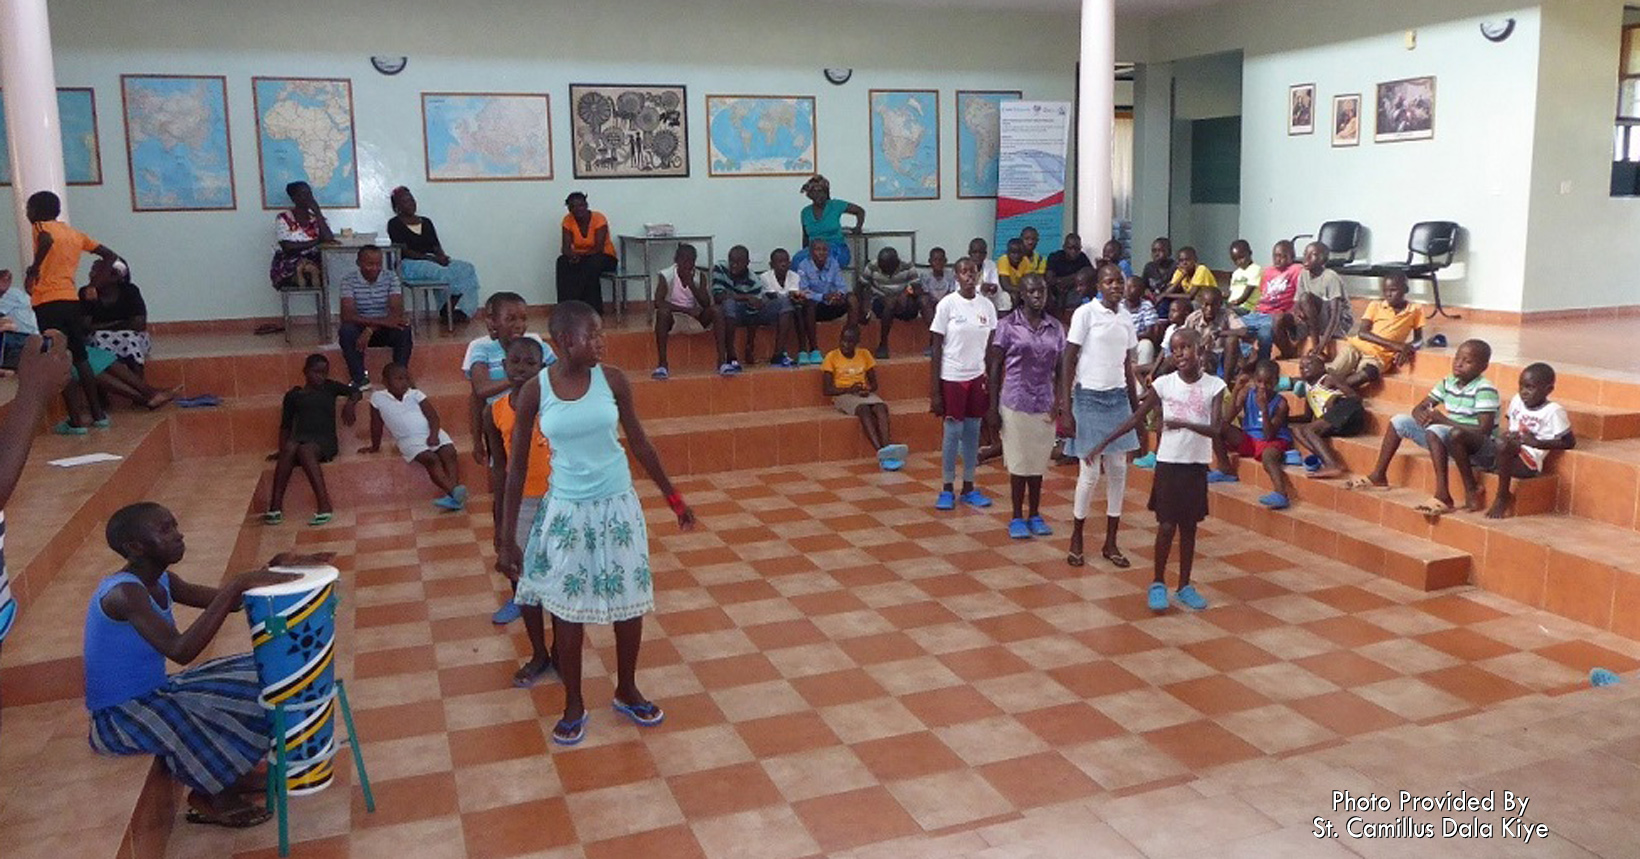 Children gather in the auditorium for dancing.